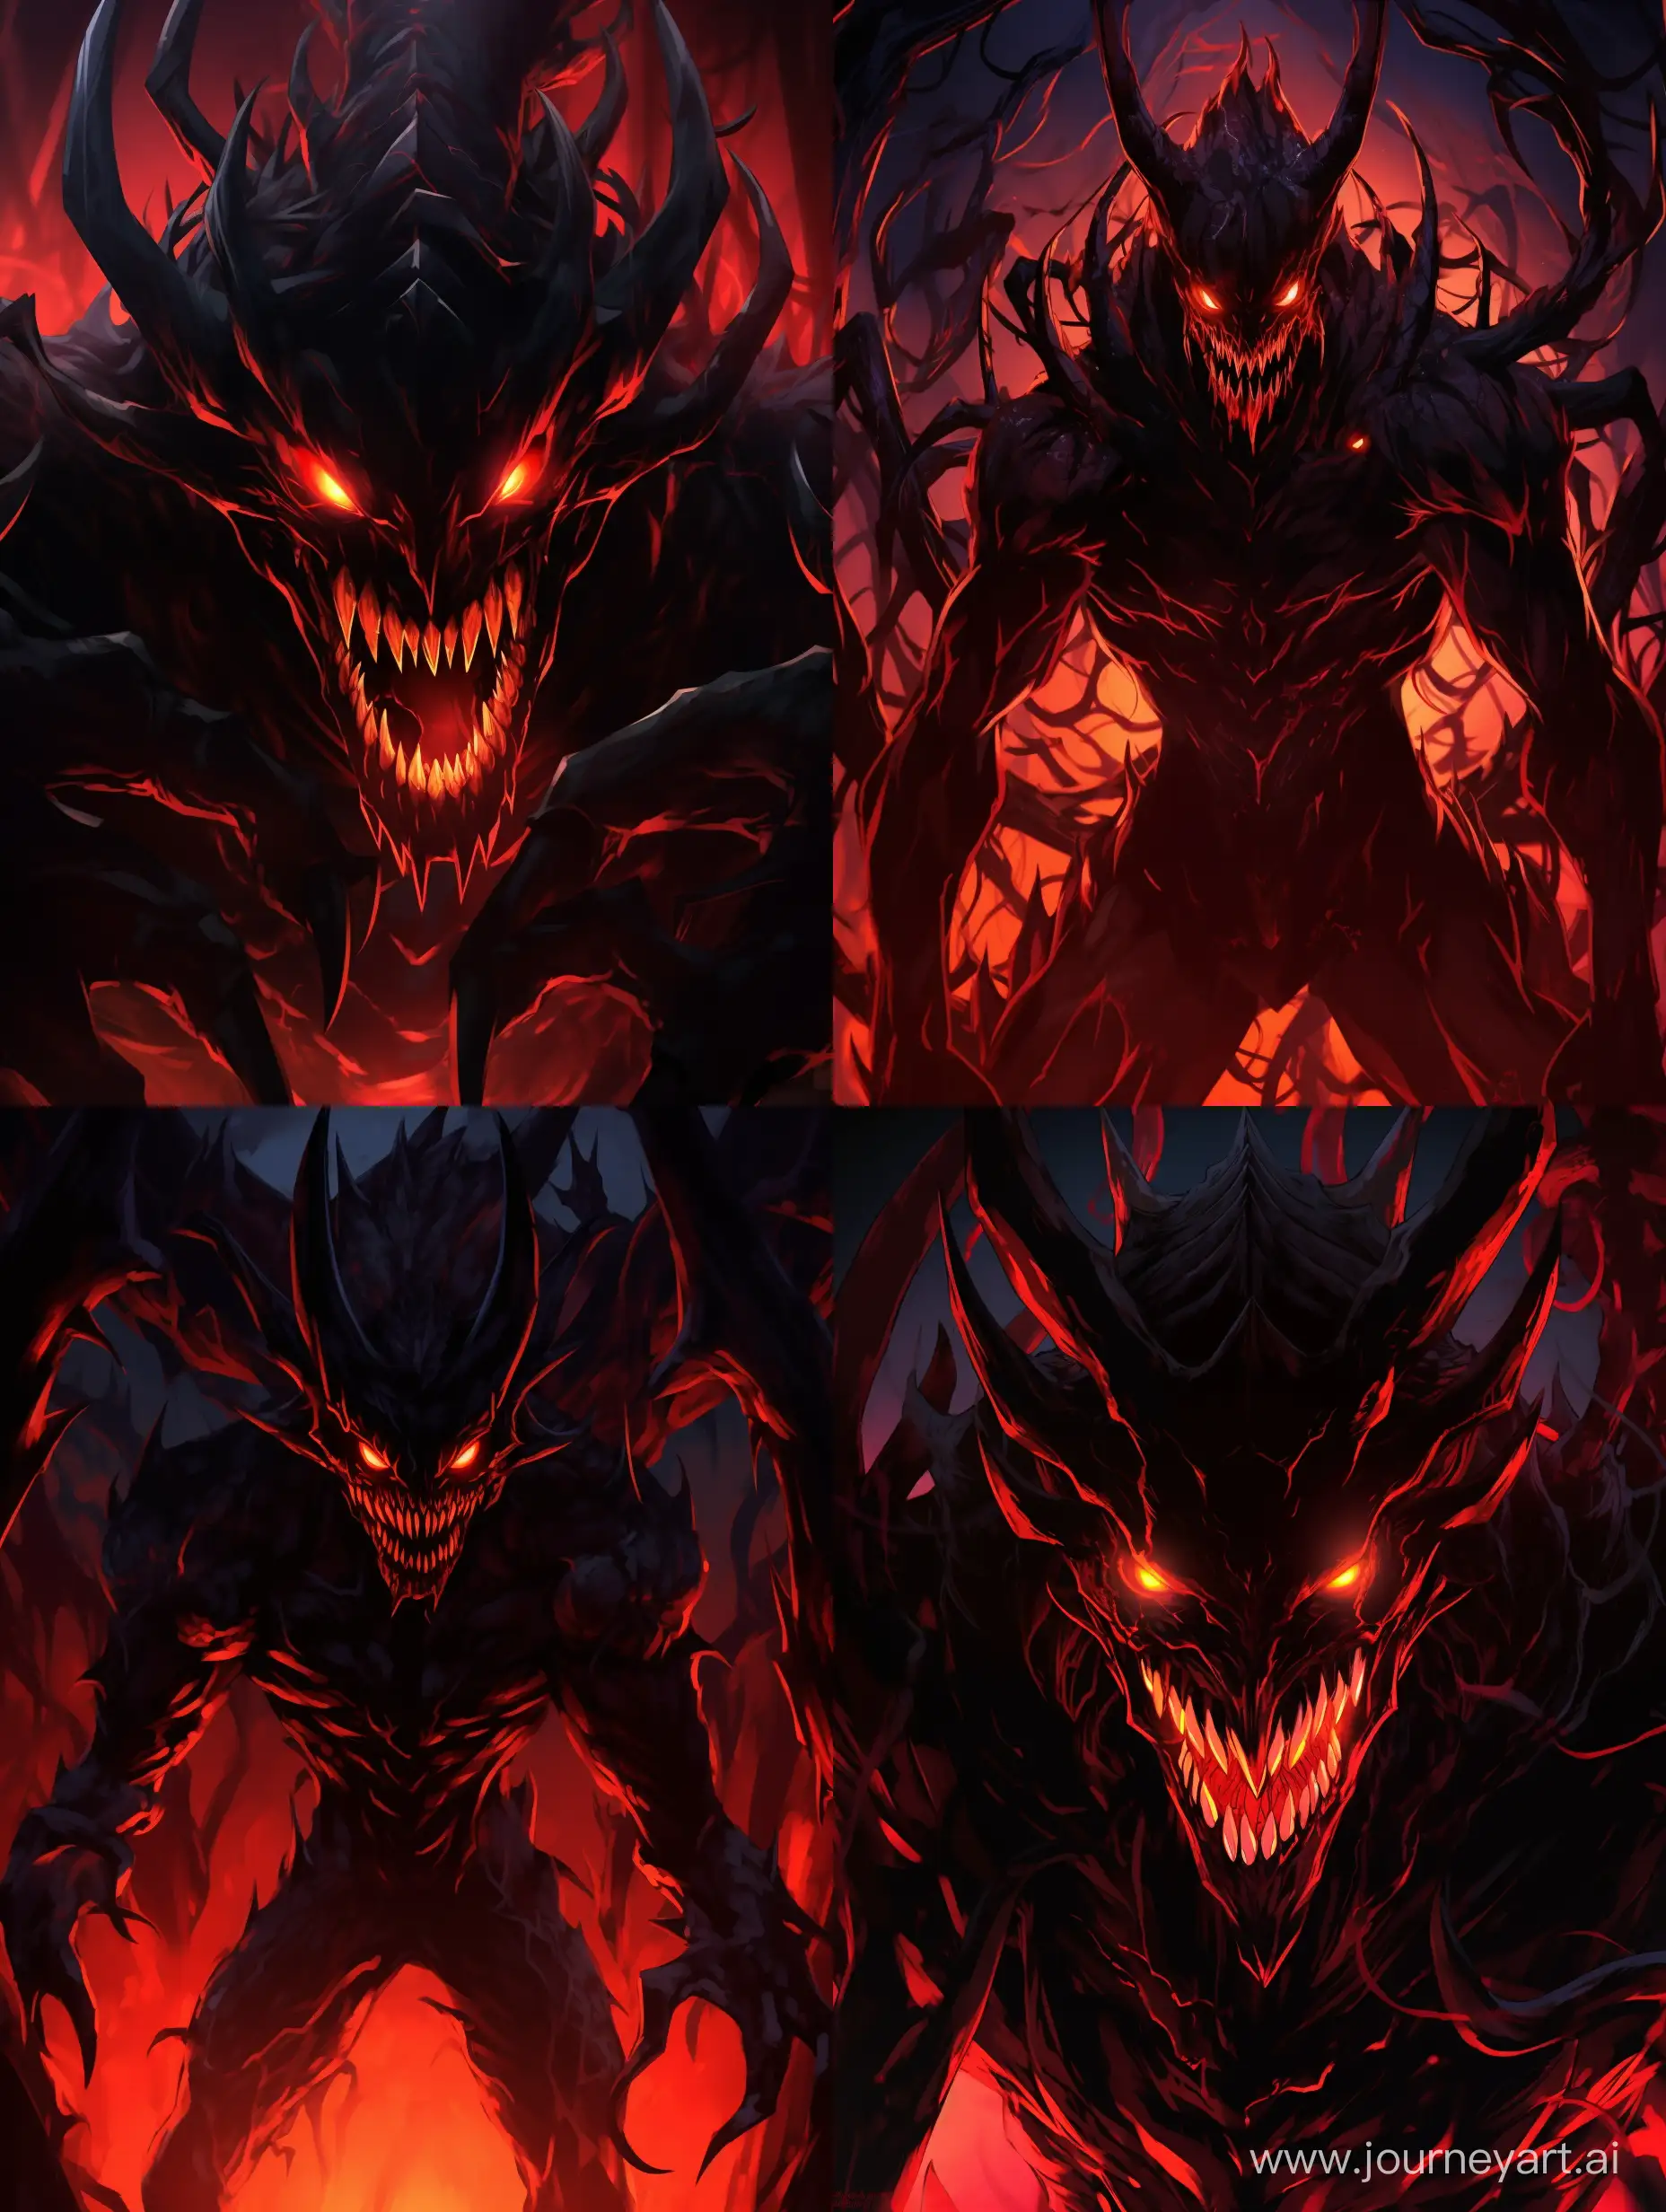 anime style, Anime, 1 entity, solo, Scary backdrop, Scary backdrop, A creature of black color, Red backlight, Neon at the edges of the essence, A pumped-up big black creature, Bottom view, Big black horns with red neon, Darkness, Mouth wide open, The eyes are filled with madness, A creature in a pose of anger, The Berserker.